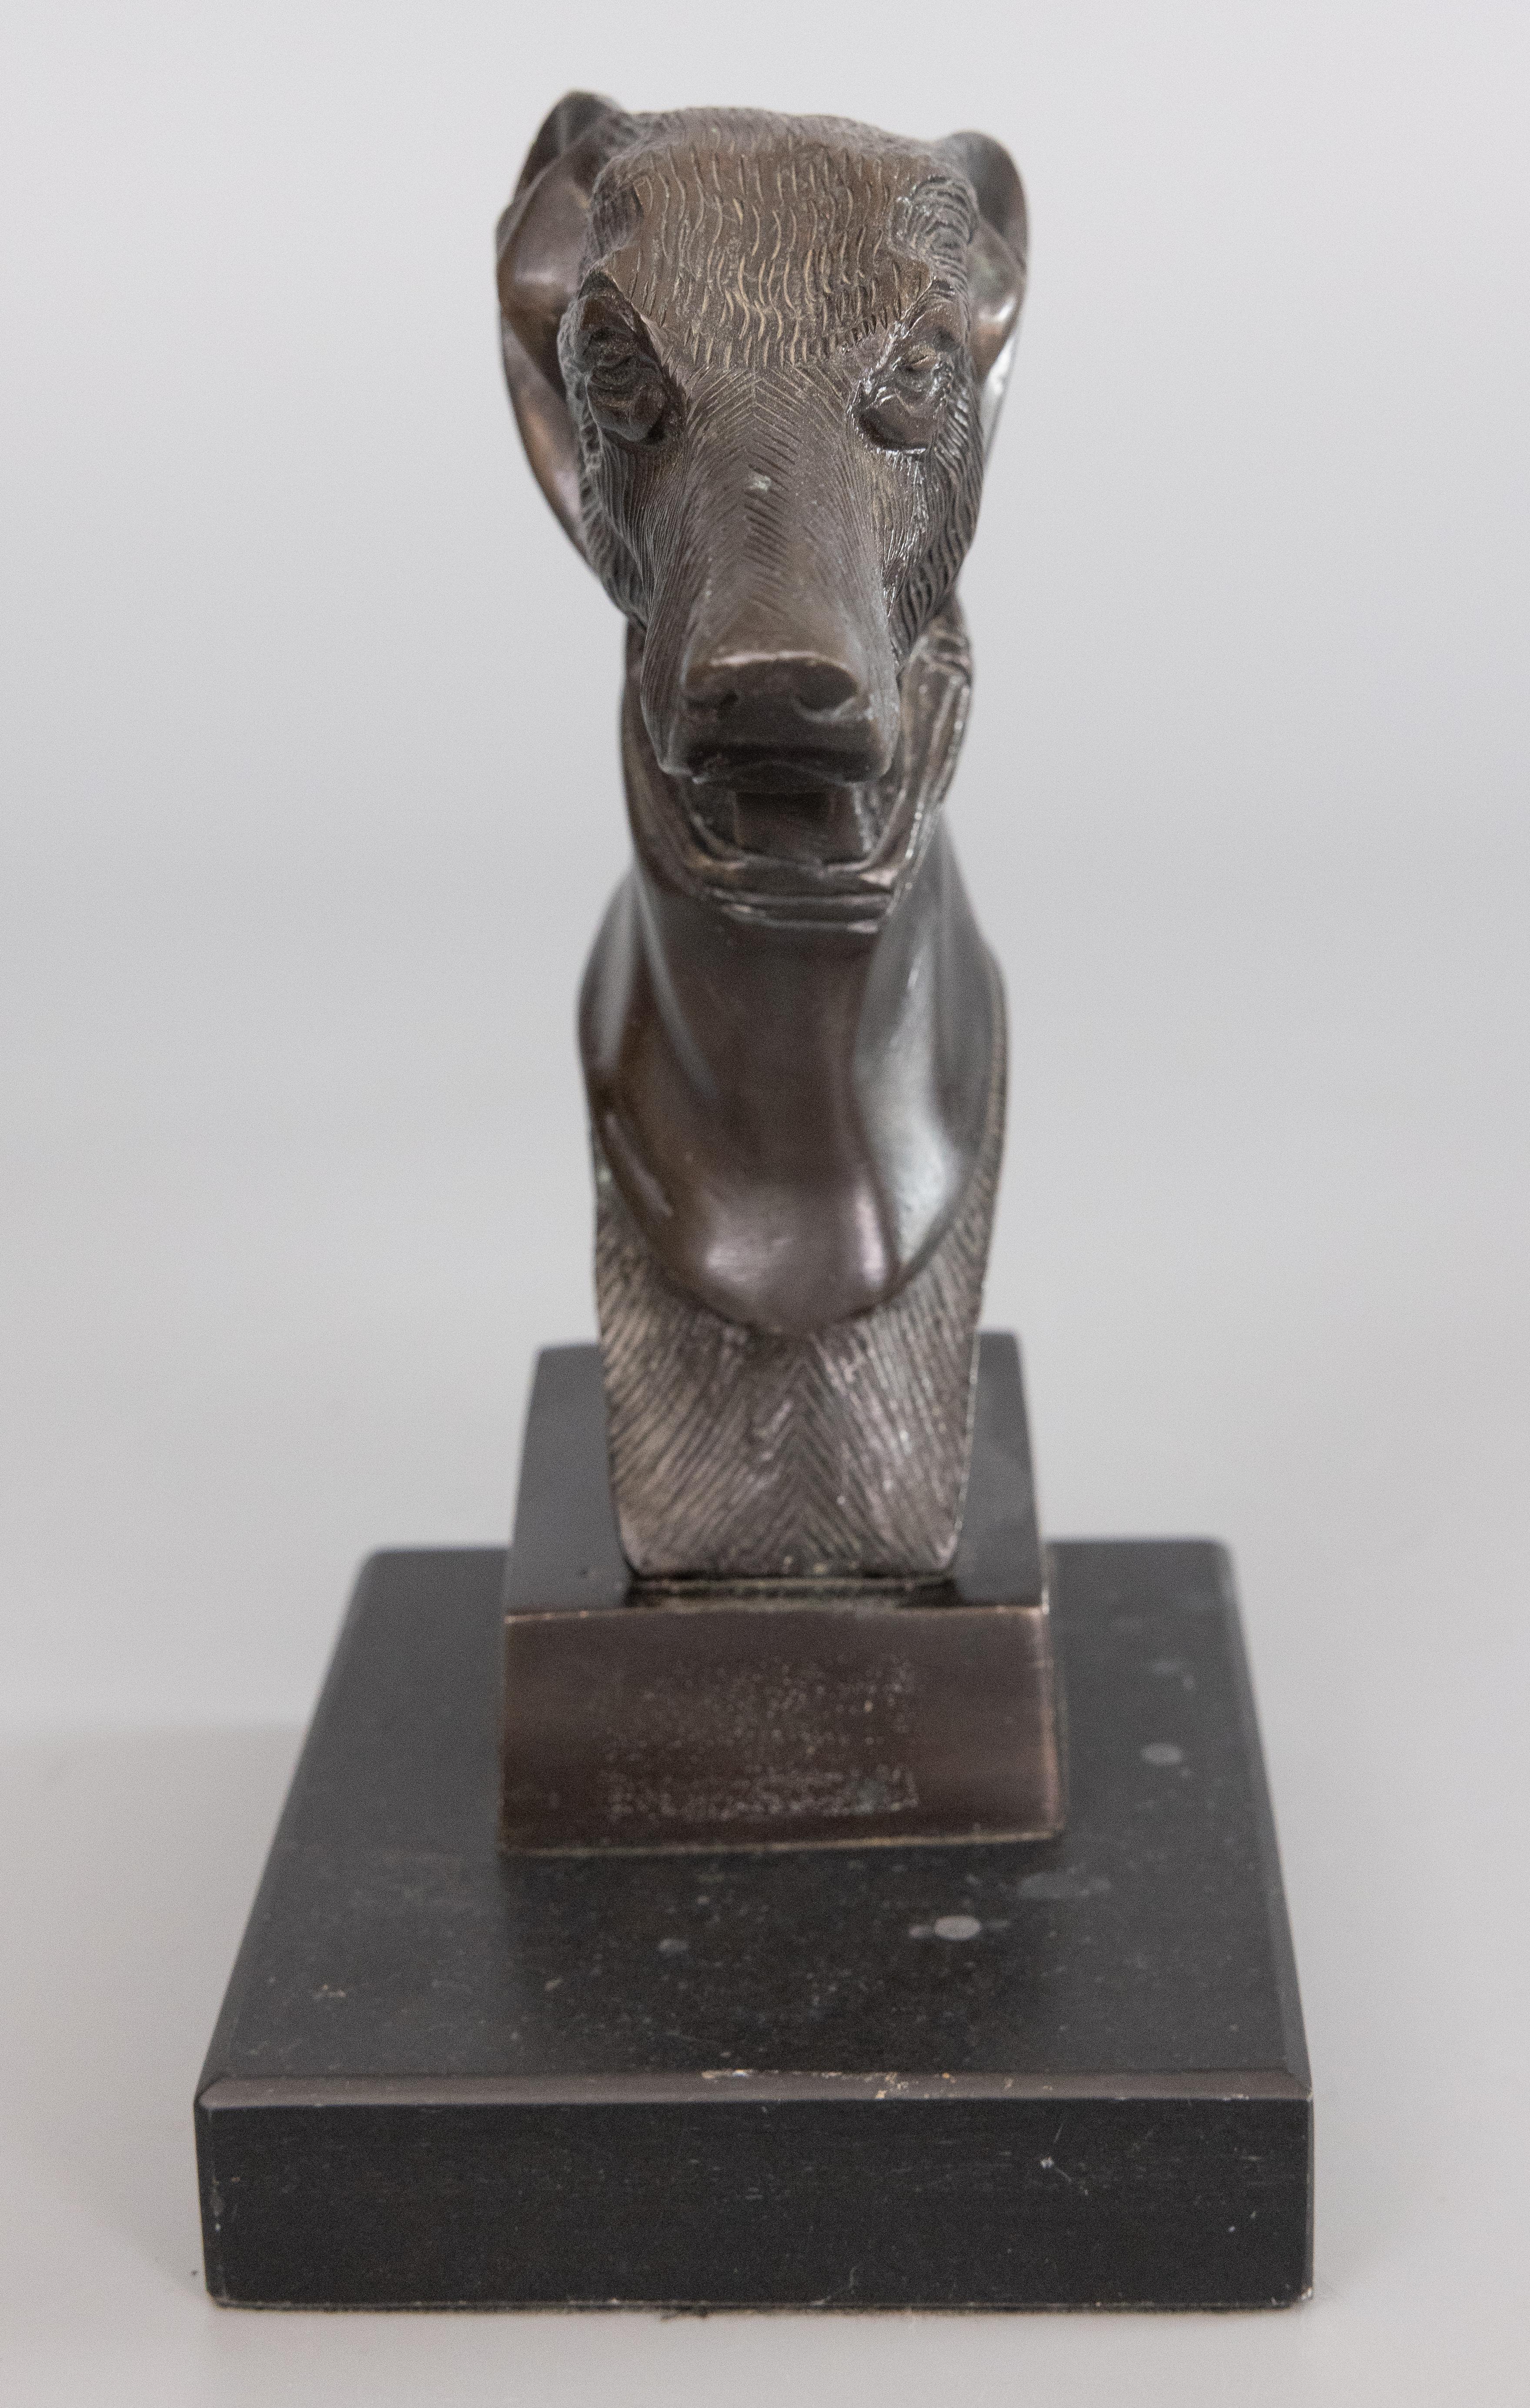 A superb vintage mid-century bronze greyhound whippet dog bust sculpture on a bronze base. This fine dog is well cast with exquisite details, perfect for the dog lover or collector. It weighs a substantial 3 lbs 14 oz and would make a handsome